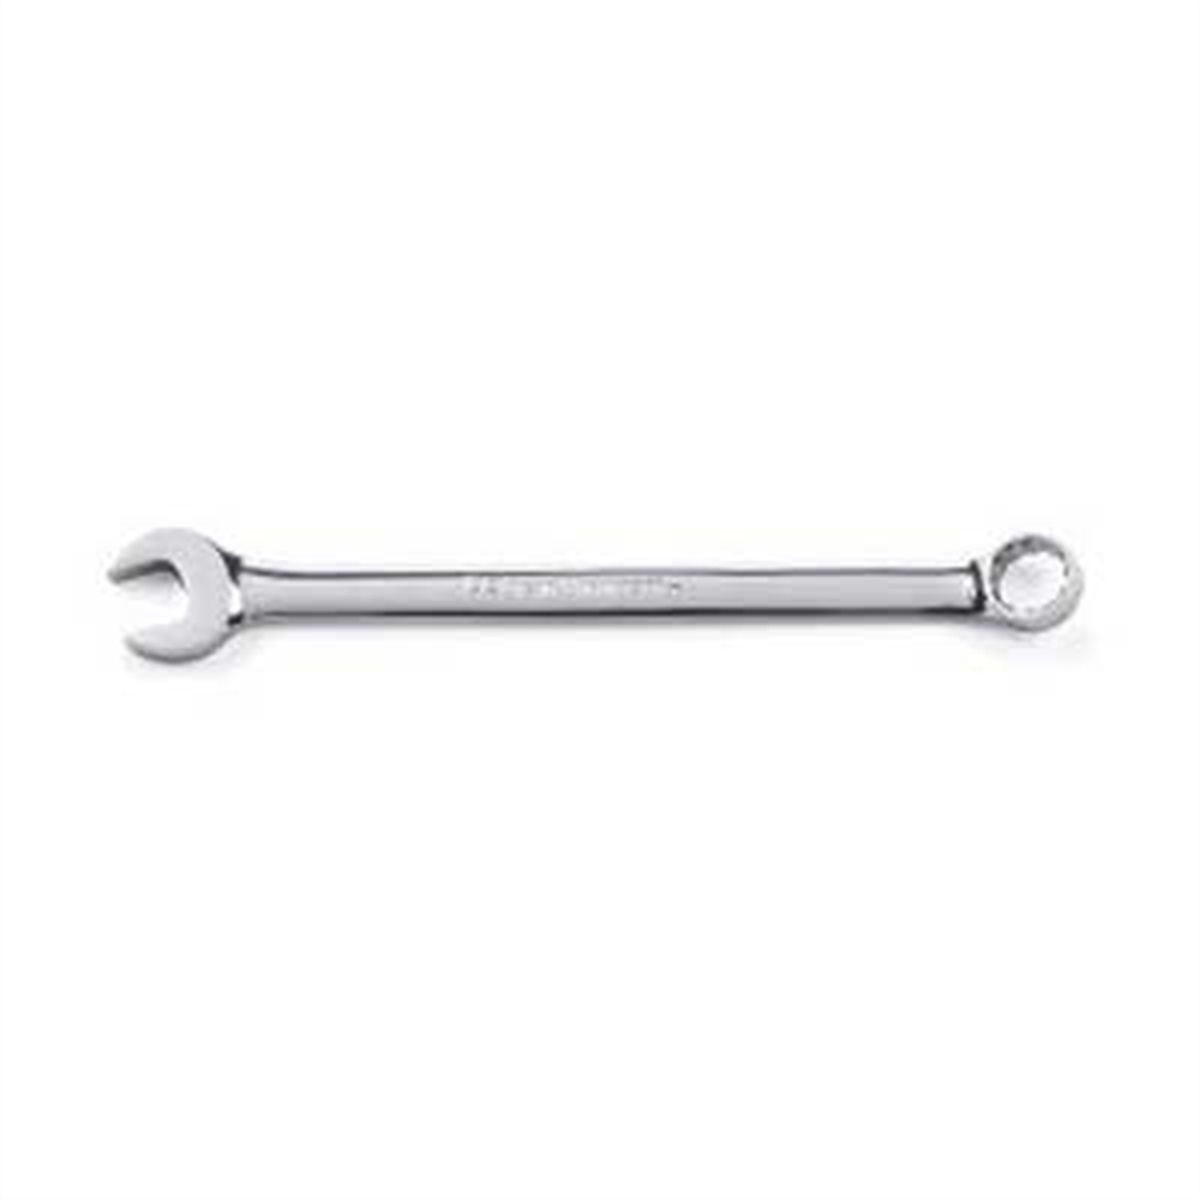 22 mm Long Pattern Combination Wrench